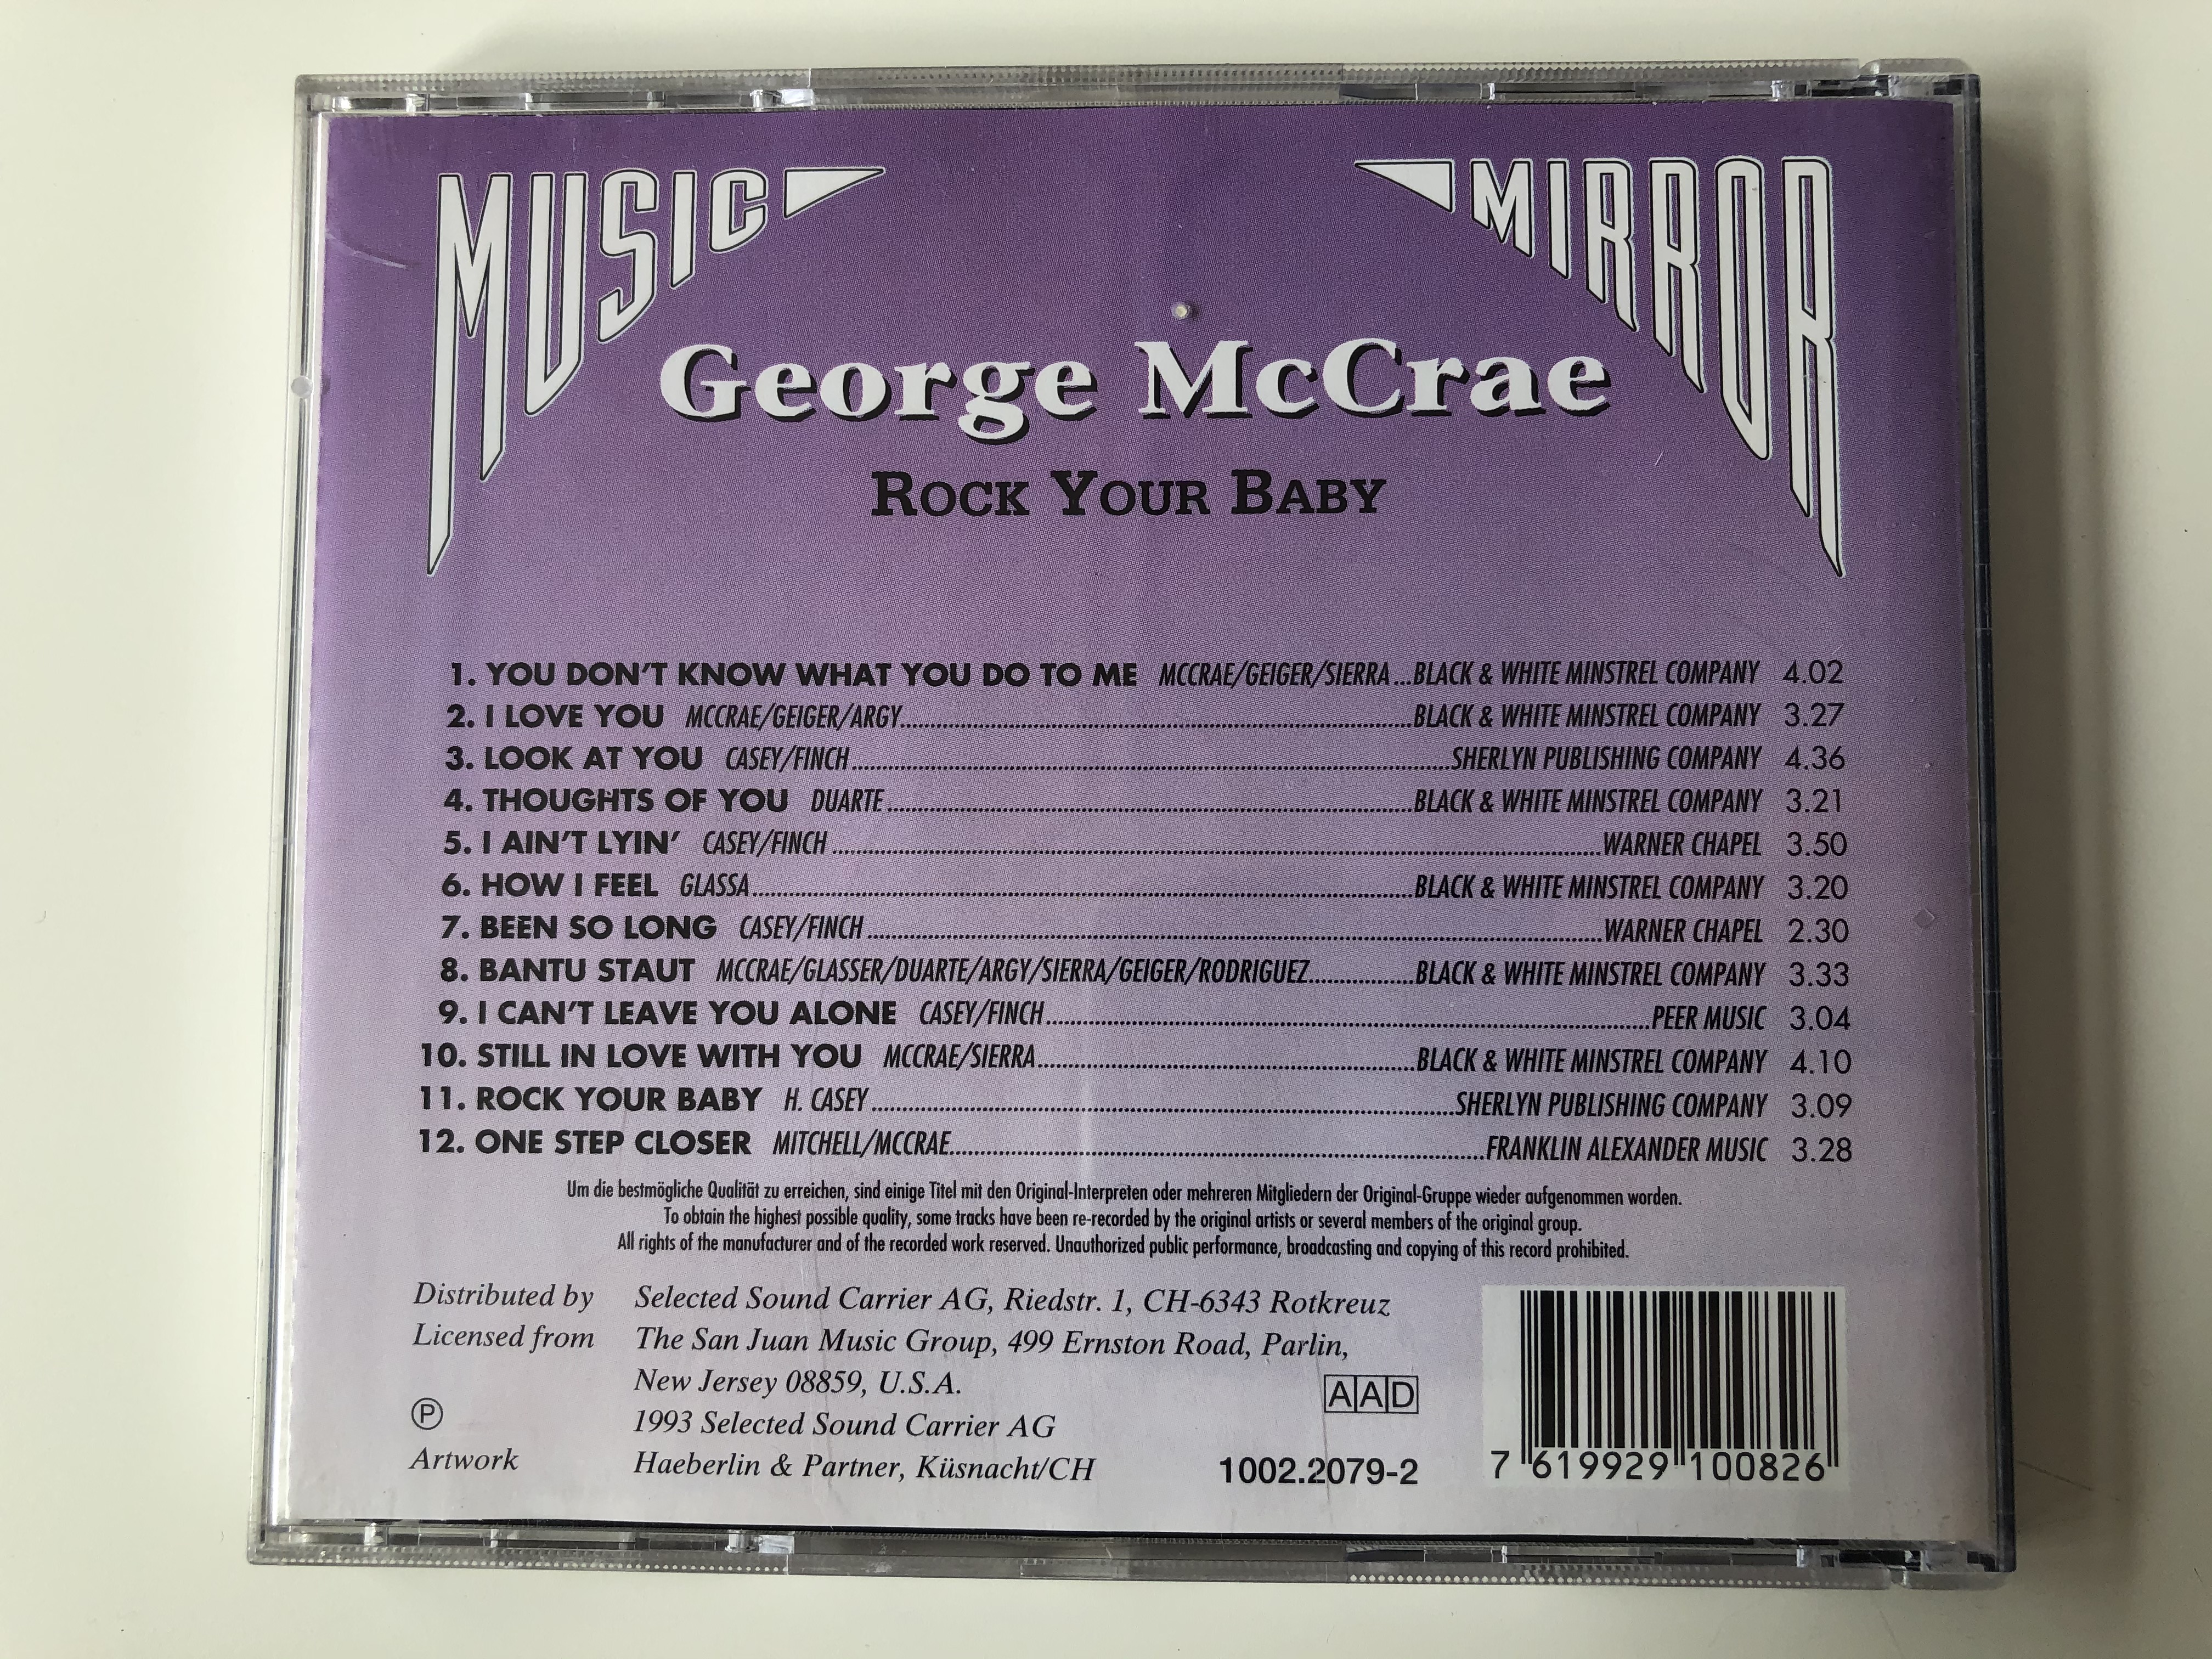 rock-your-body-george-mccrae-selected-sound-carrier-audio-cd-1993-1002-4-.jpg